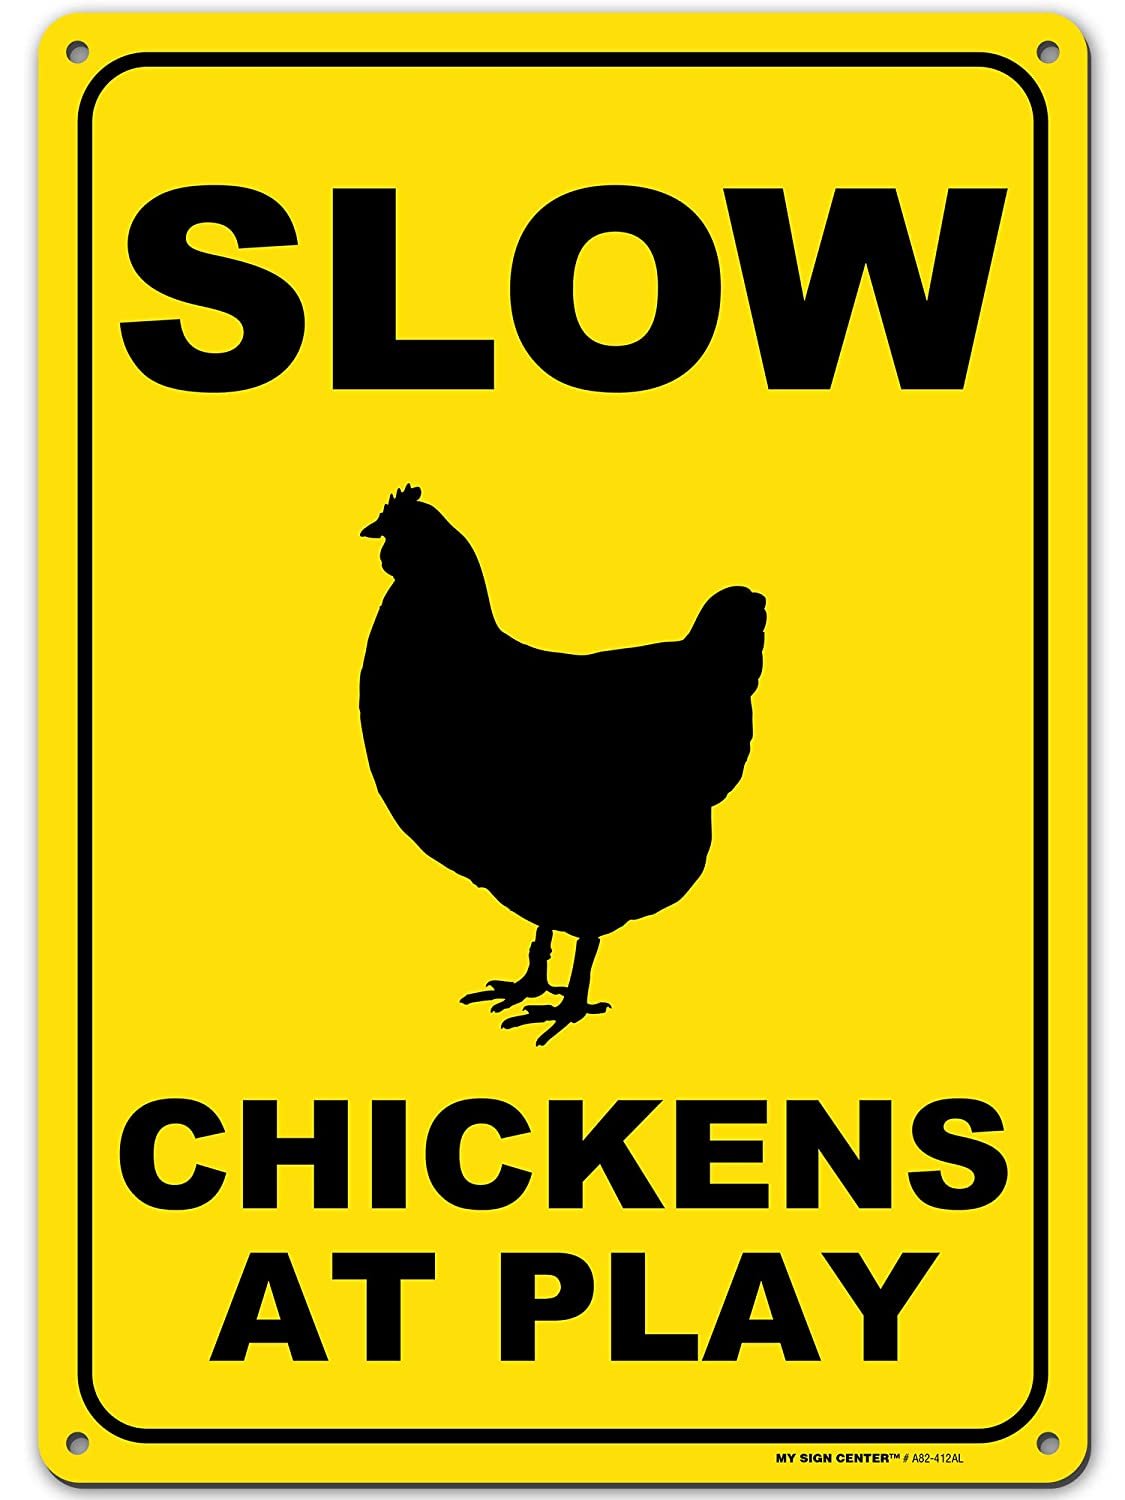 Slow Chickens at Play Caution or Chicken Crossing Sign